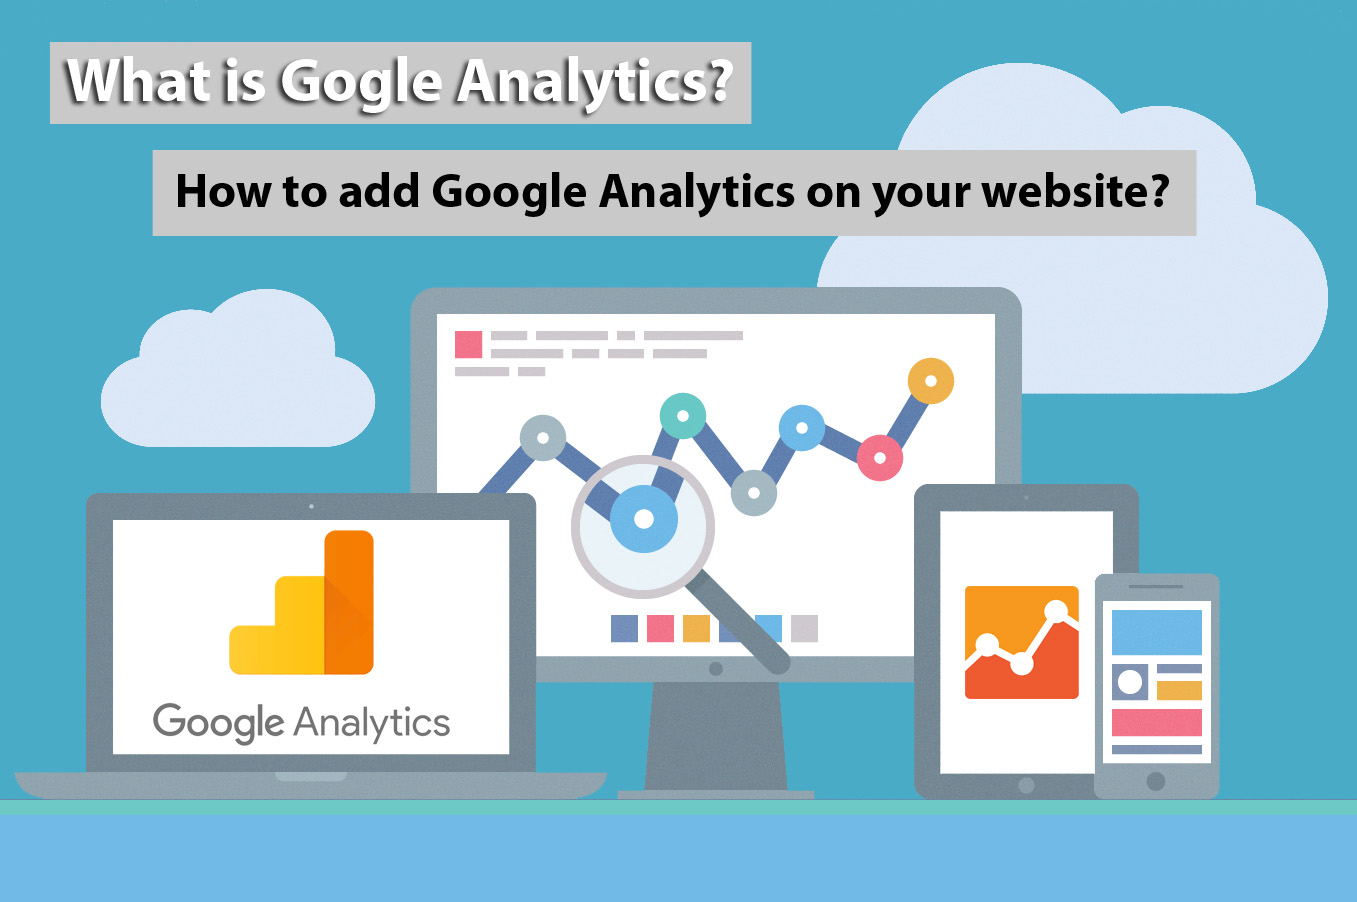 What is Google Analytics, how to add to your website?